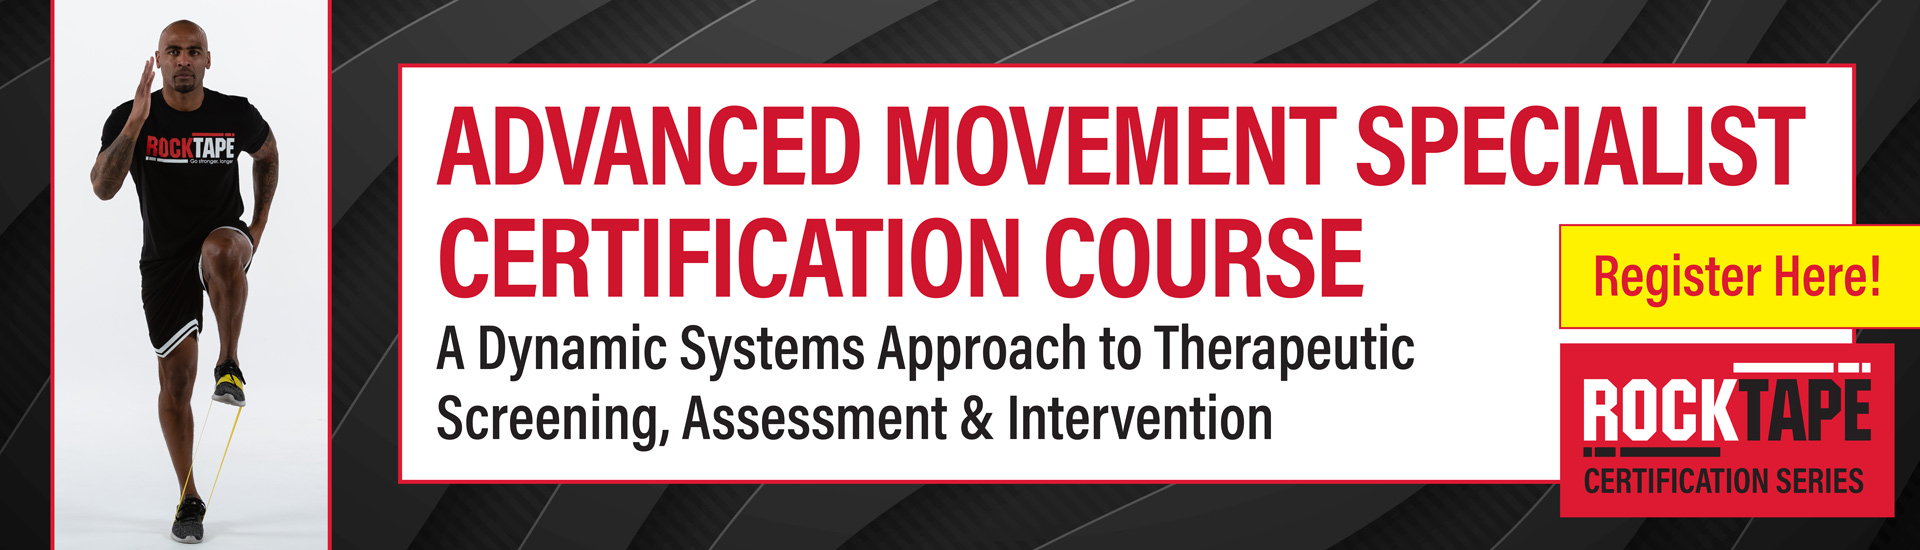 Advanced Movement Specialist Certification Course: A Dynamic Systems Approach to Therapeutic Screening, Assessment & Intervention